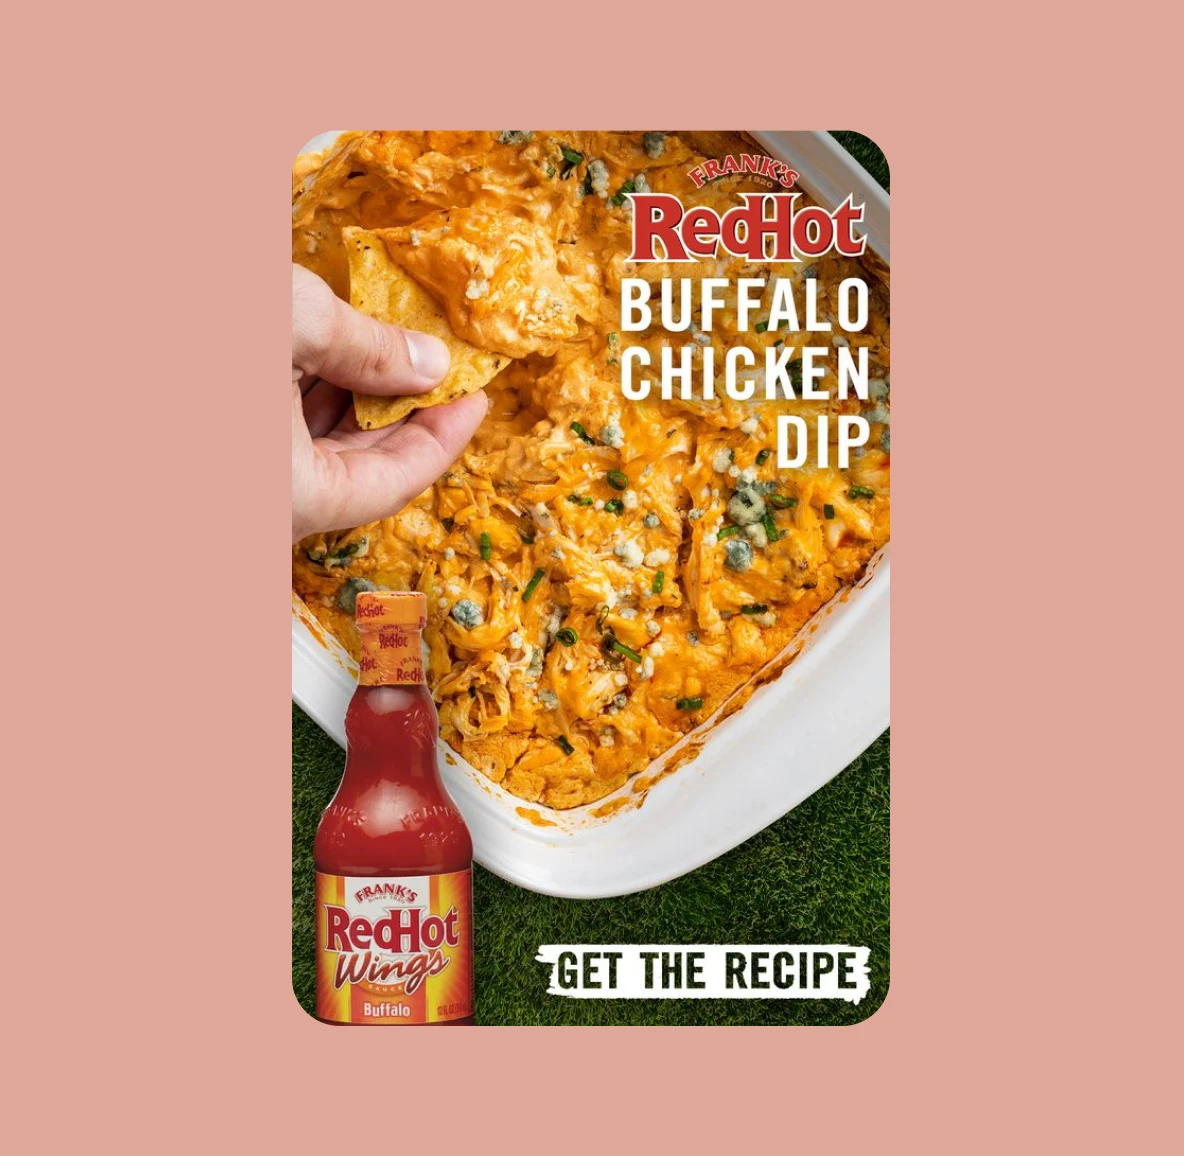 A Pin showing a plate of Frank’s RedHot buffalo chicken dip, a bottle of their buffalo chicken sauce and the words, “Get the recipe”